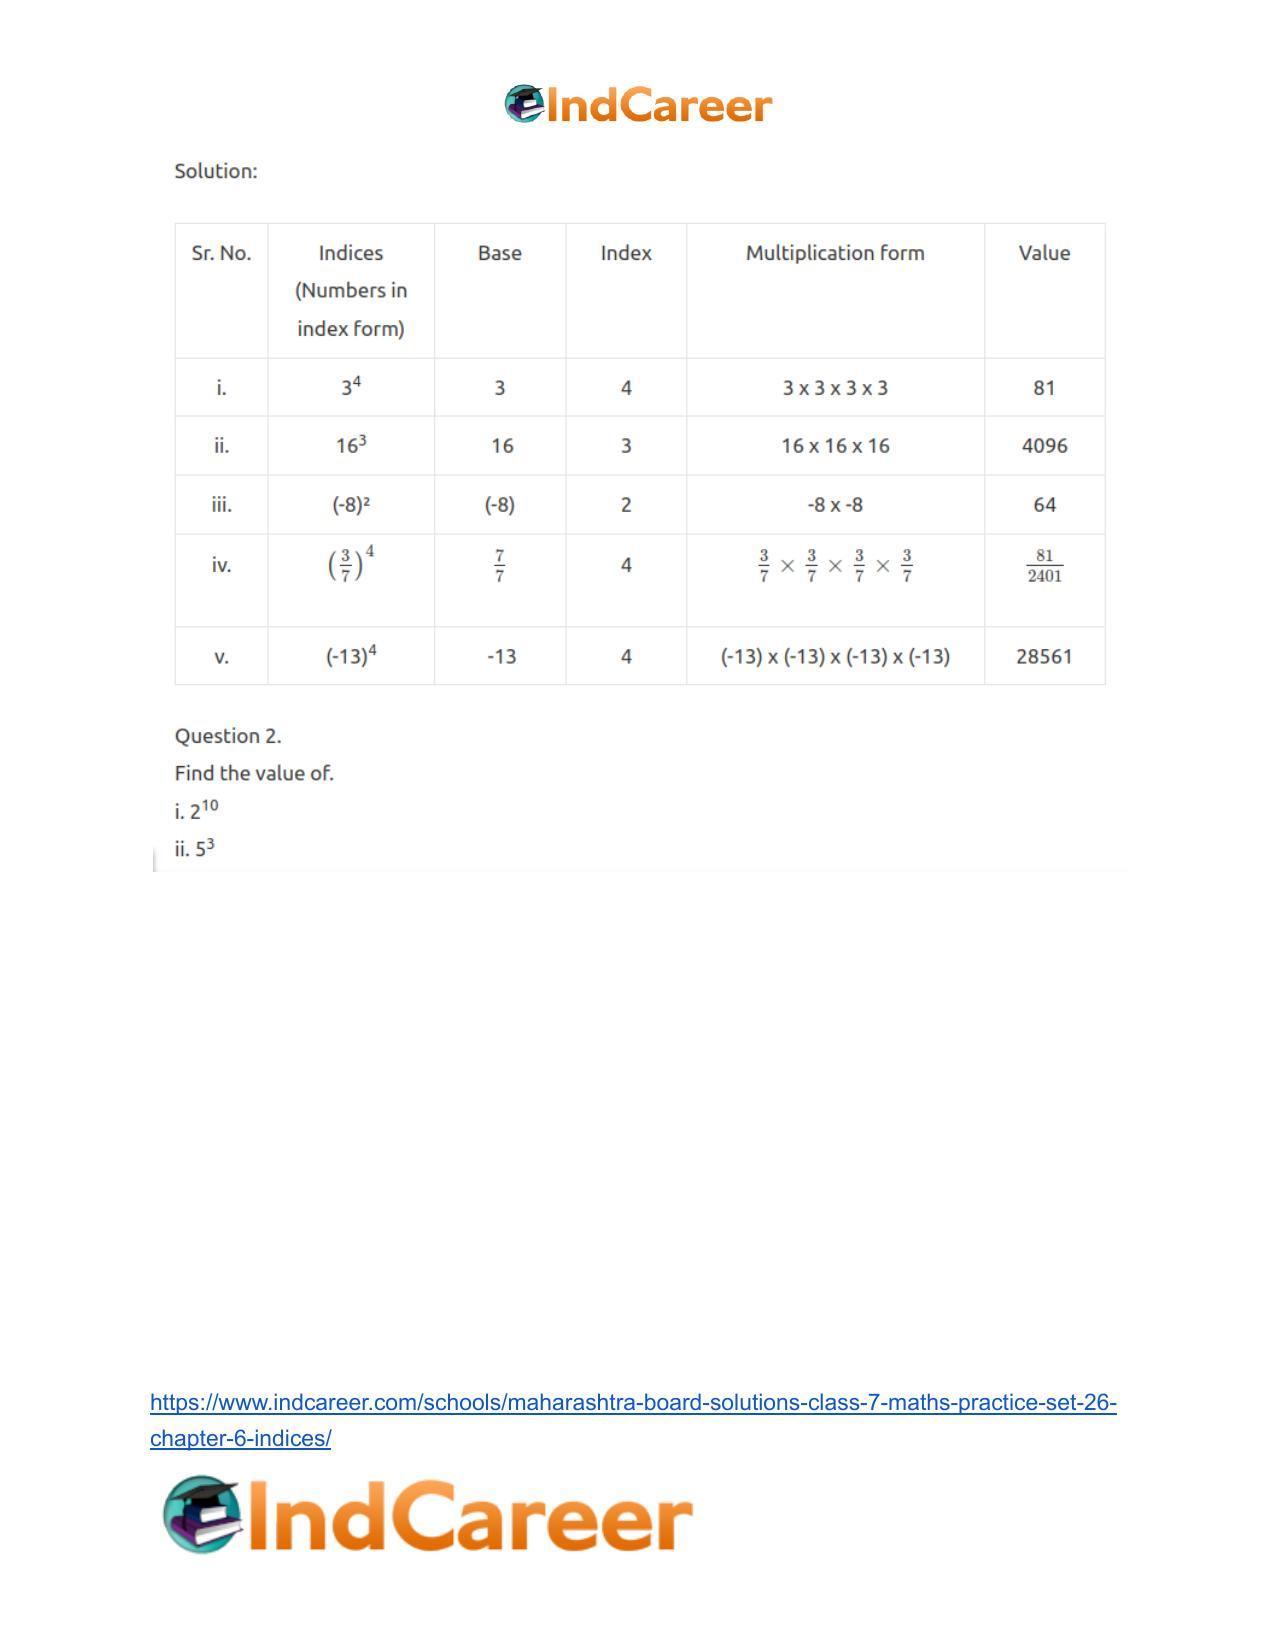 Maharashtra Board Solutions Class 7-Maths (Practice Set 26): Chapter 6- Indices - Page 4